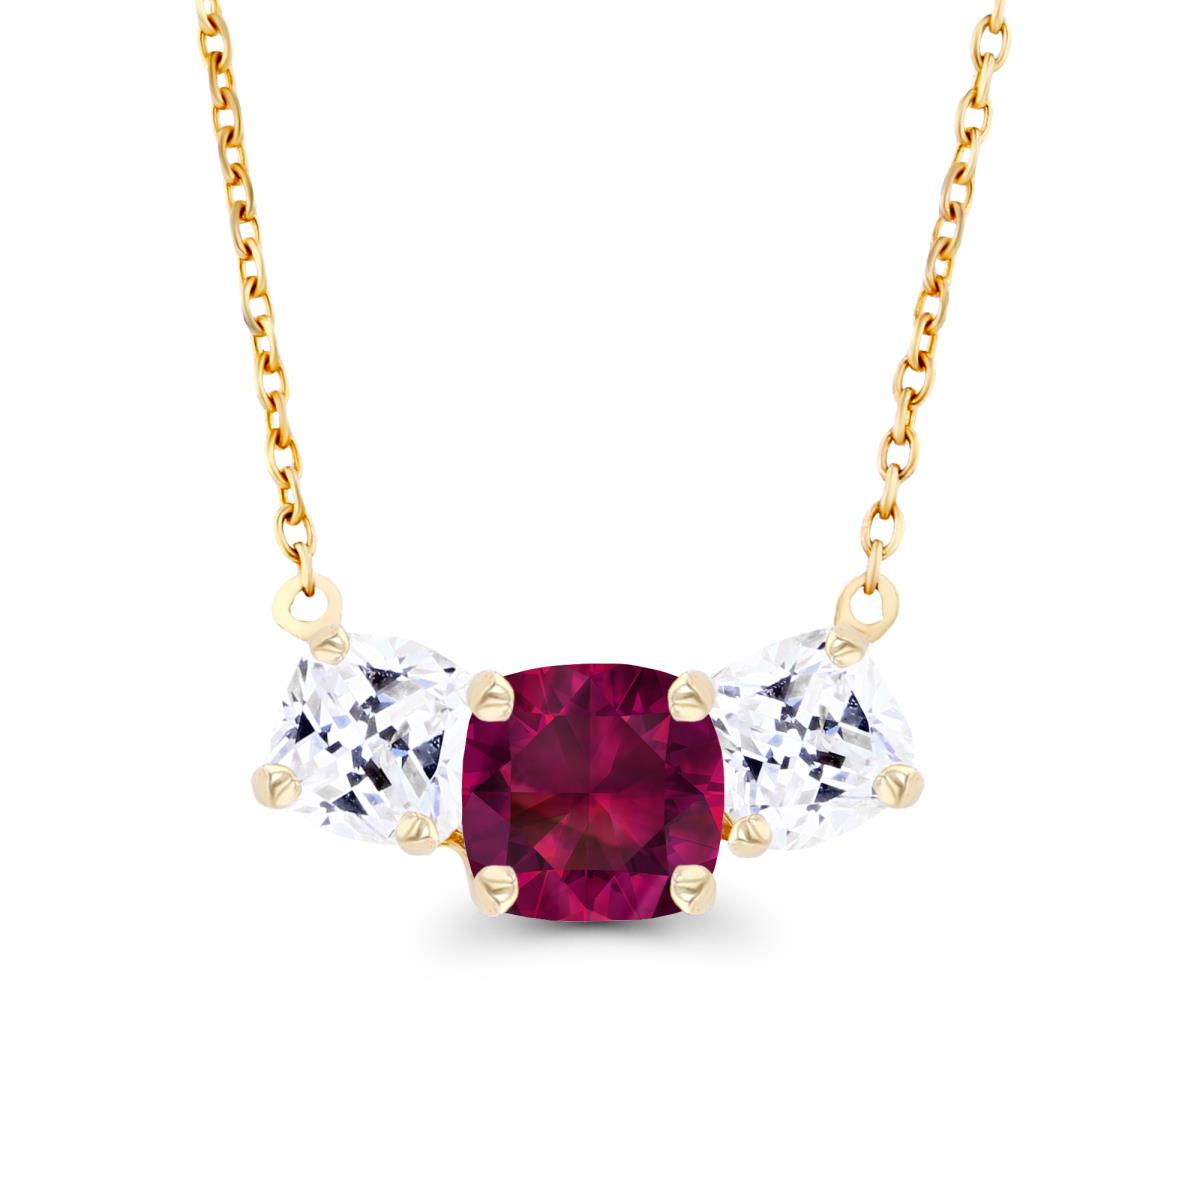 14K Yellow Gold 5mm Cushion Created Ruby & 4mm Cushion Created White Sapphire 3-Stone 18" Necklace